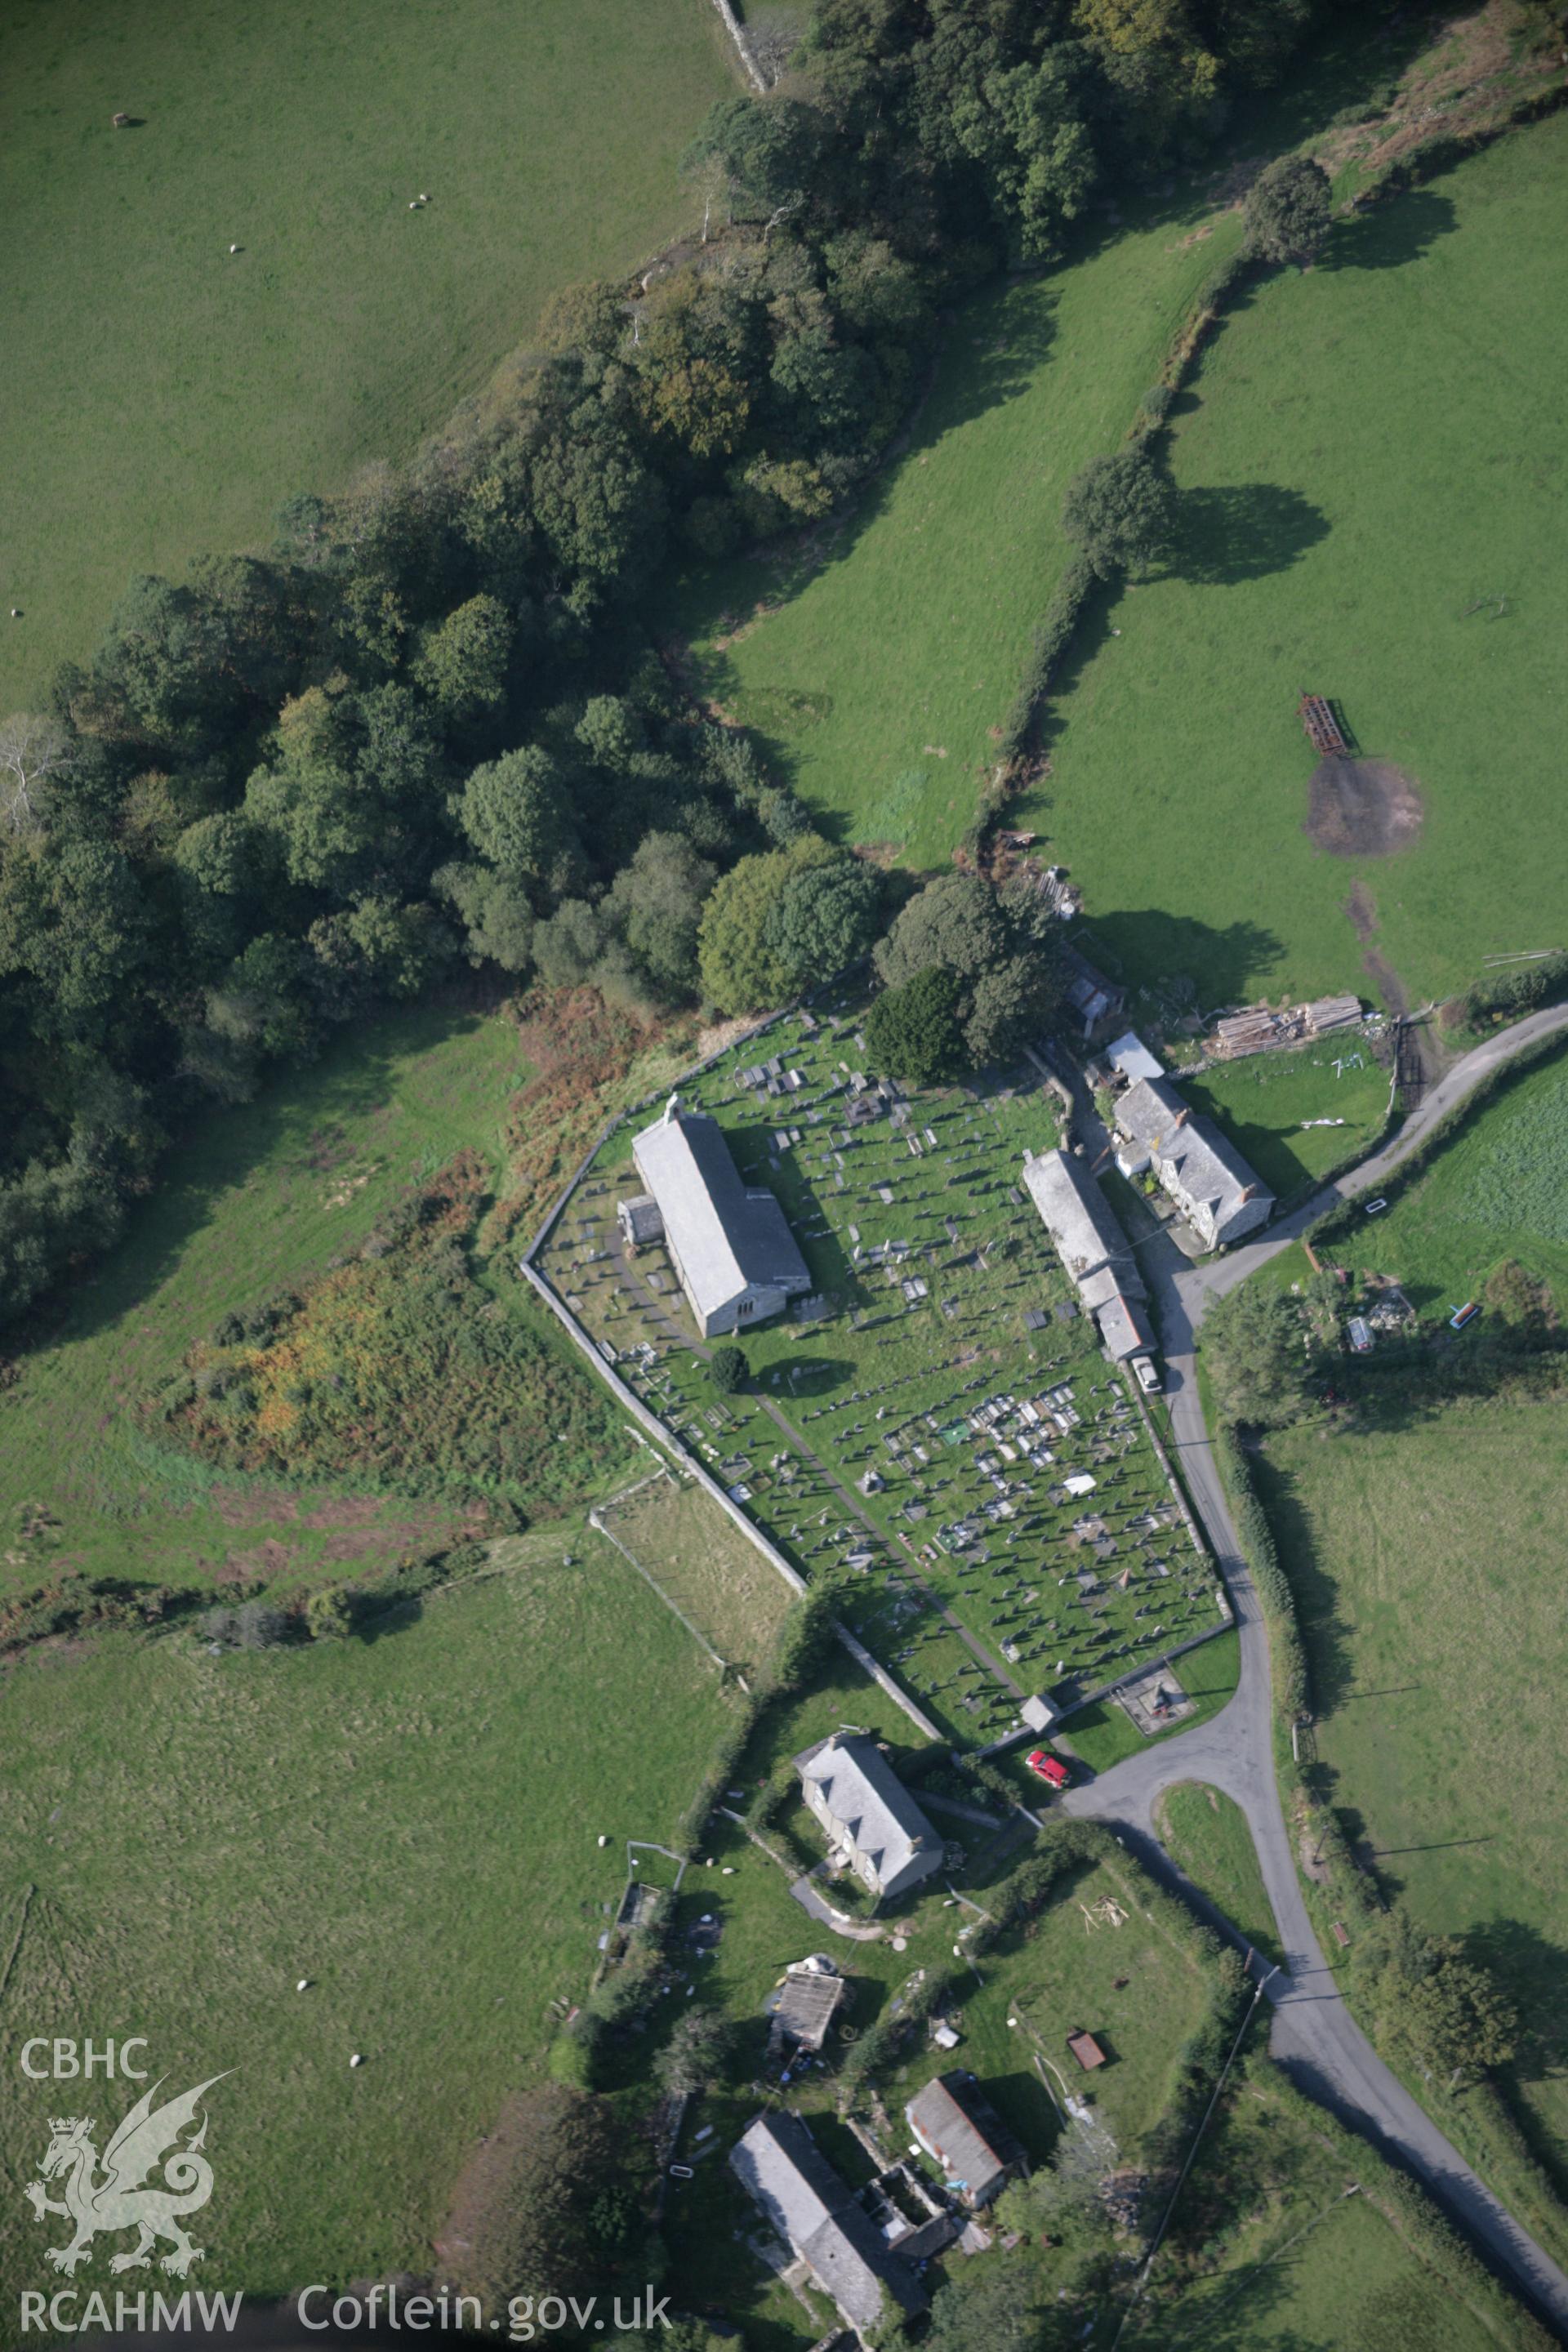 RCAHMW colour oblique aerial photograph of St Mary and St Egryn's Church, Llanegryn, from the south-east. Taken on 17 October 2005 by Toby Driver